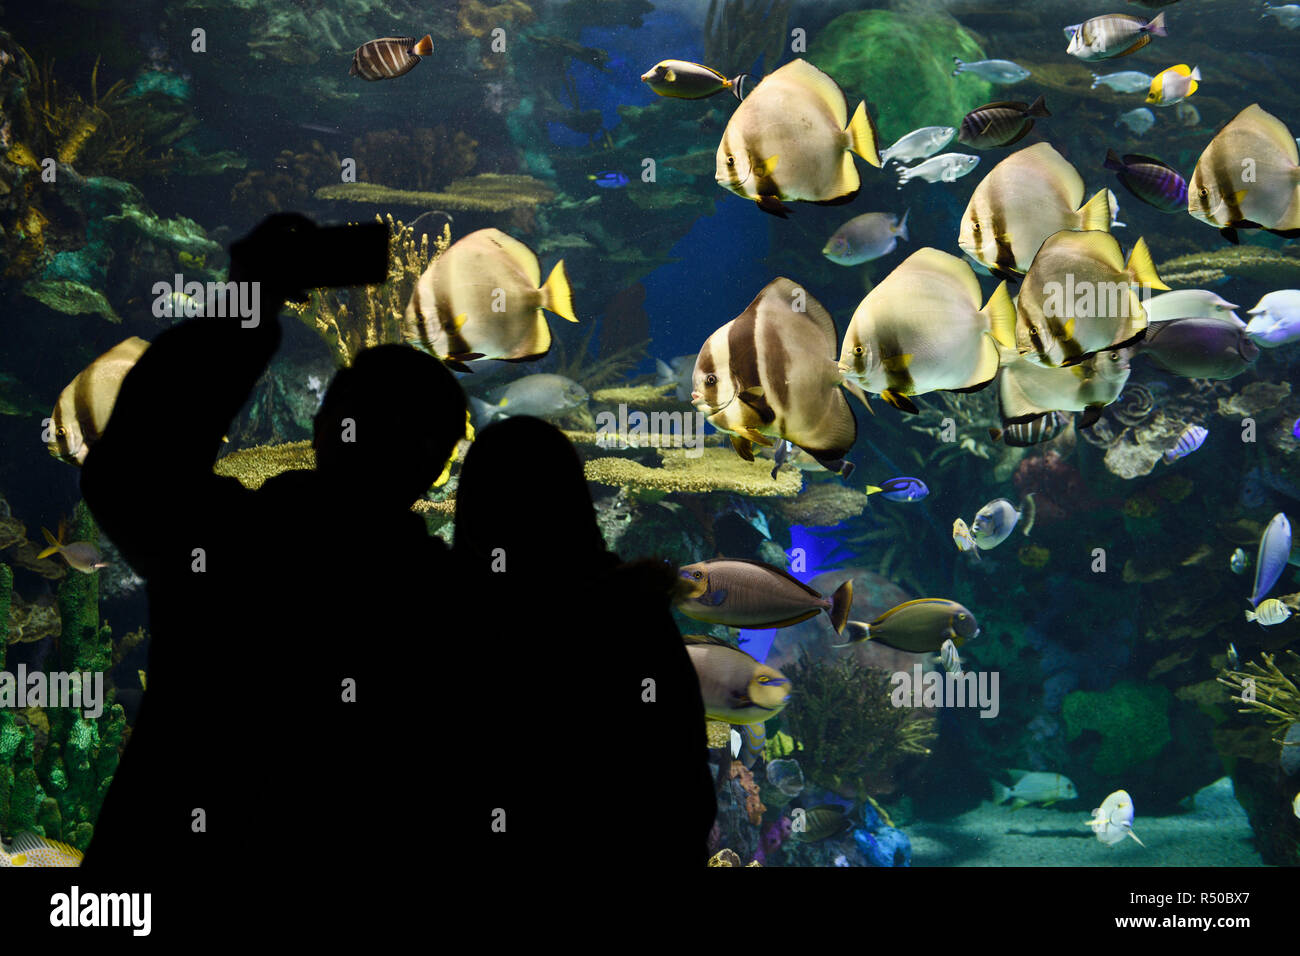 Couple taking a selfy in front Rainbow Reef aquarium Indo-Pacific coral reef with watching school of Batfish Stock Photo